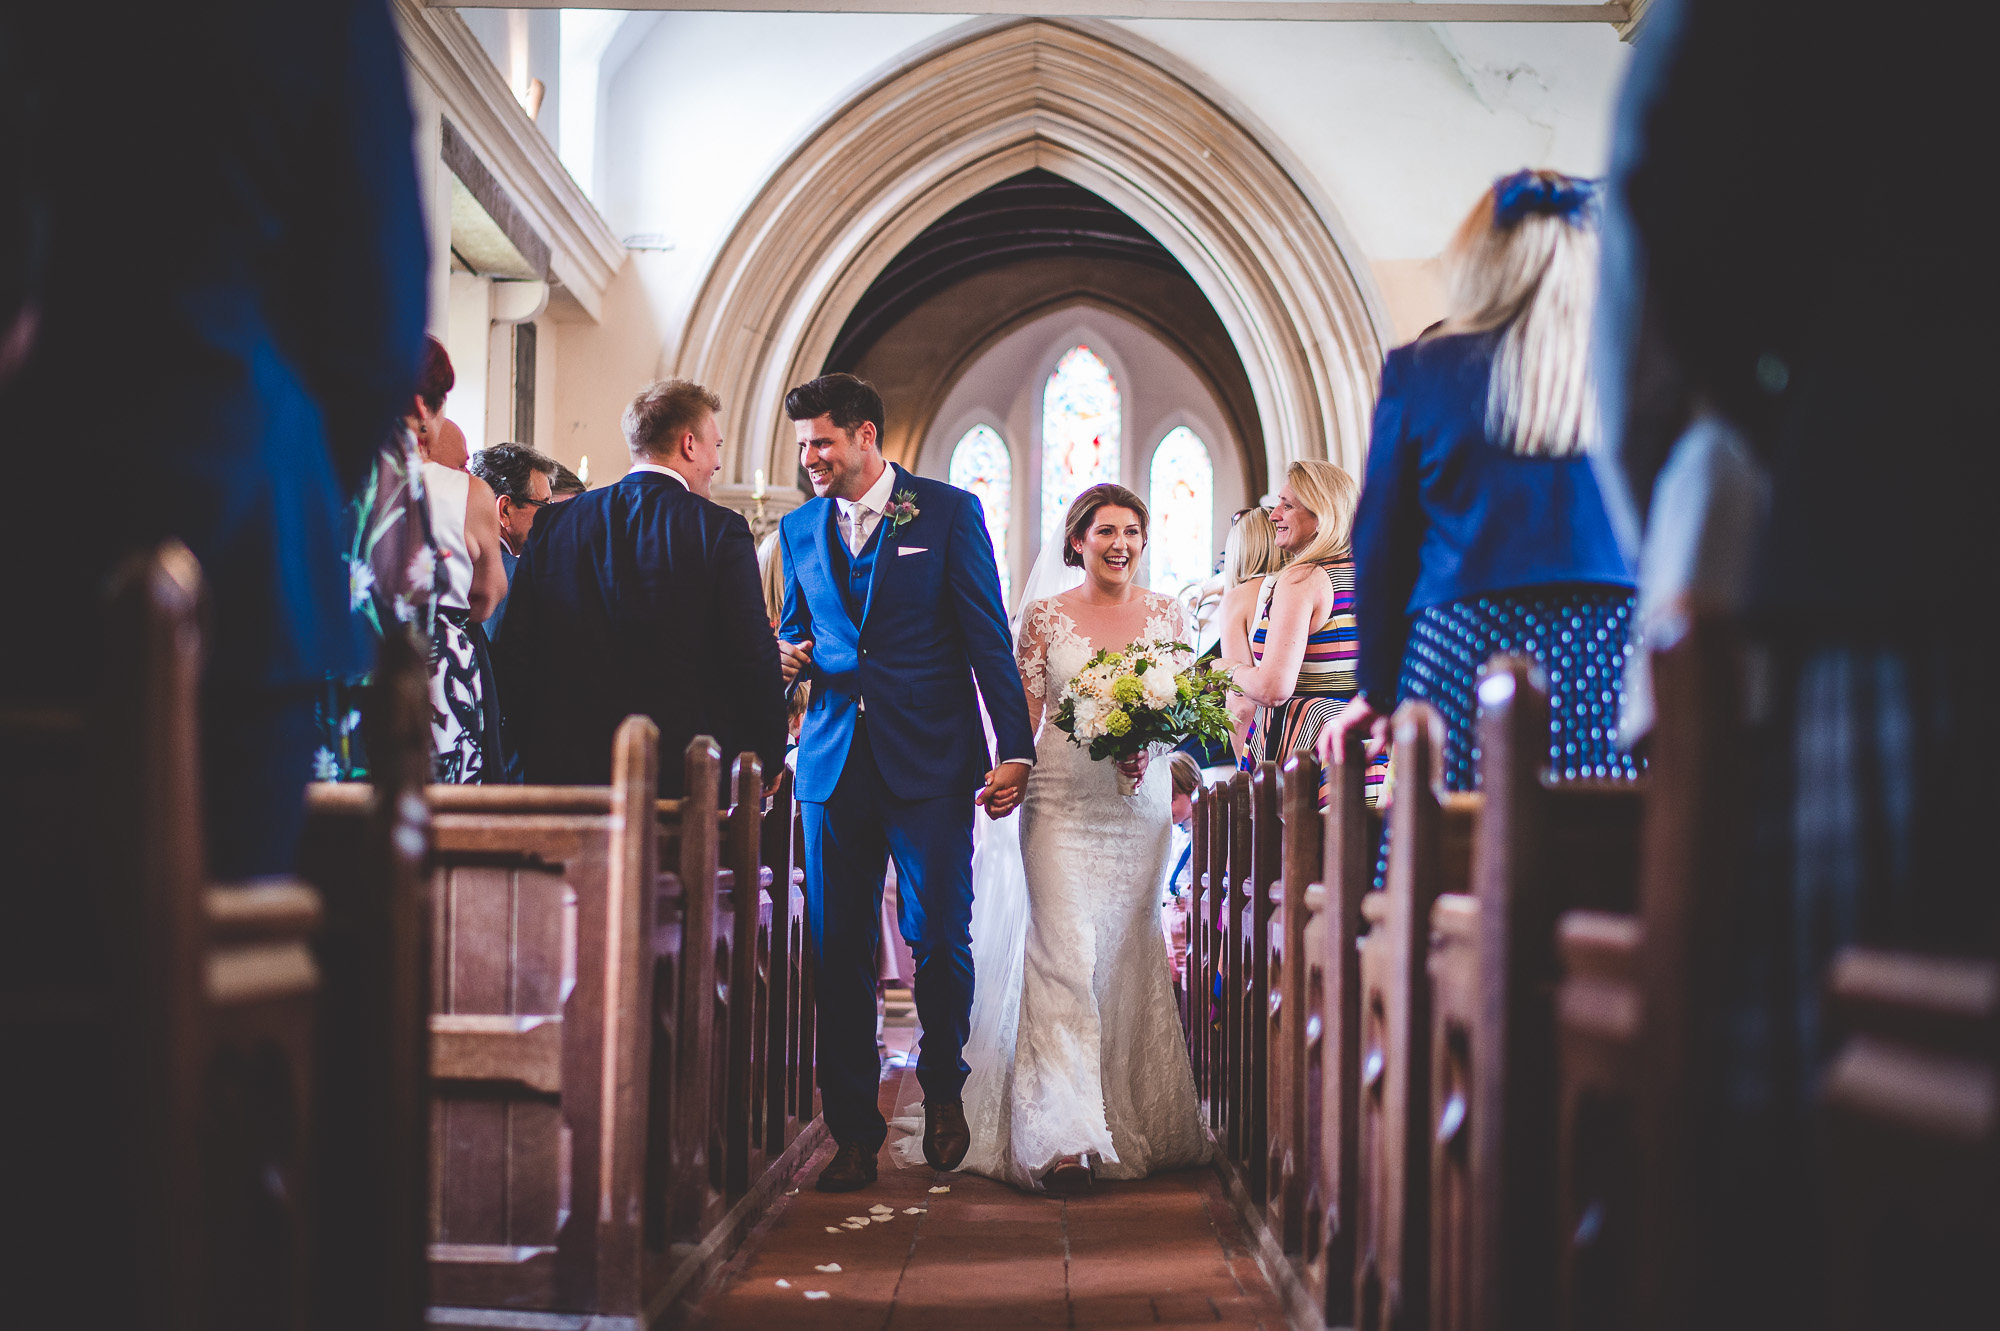 A wedding photographer capturing the moment a bride and groom walk down the church aisle.